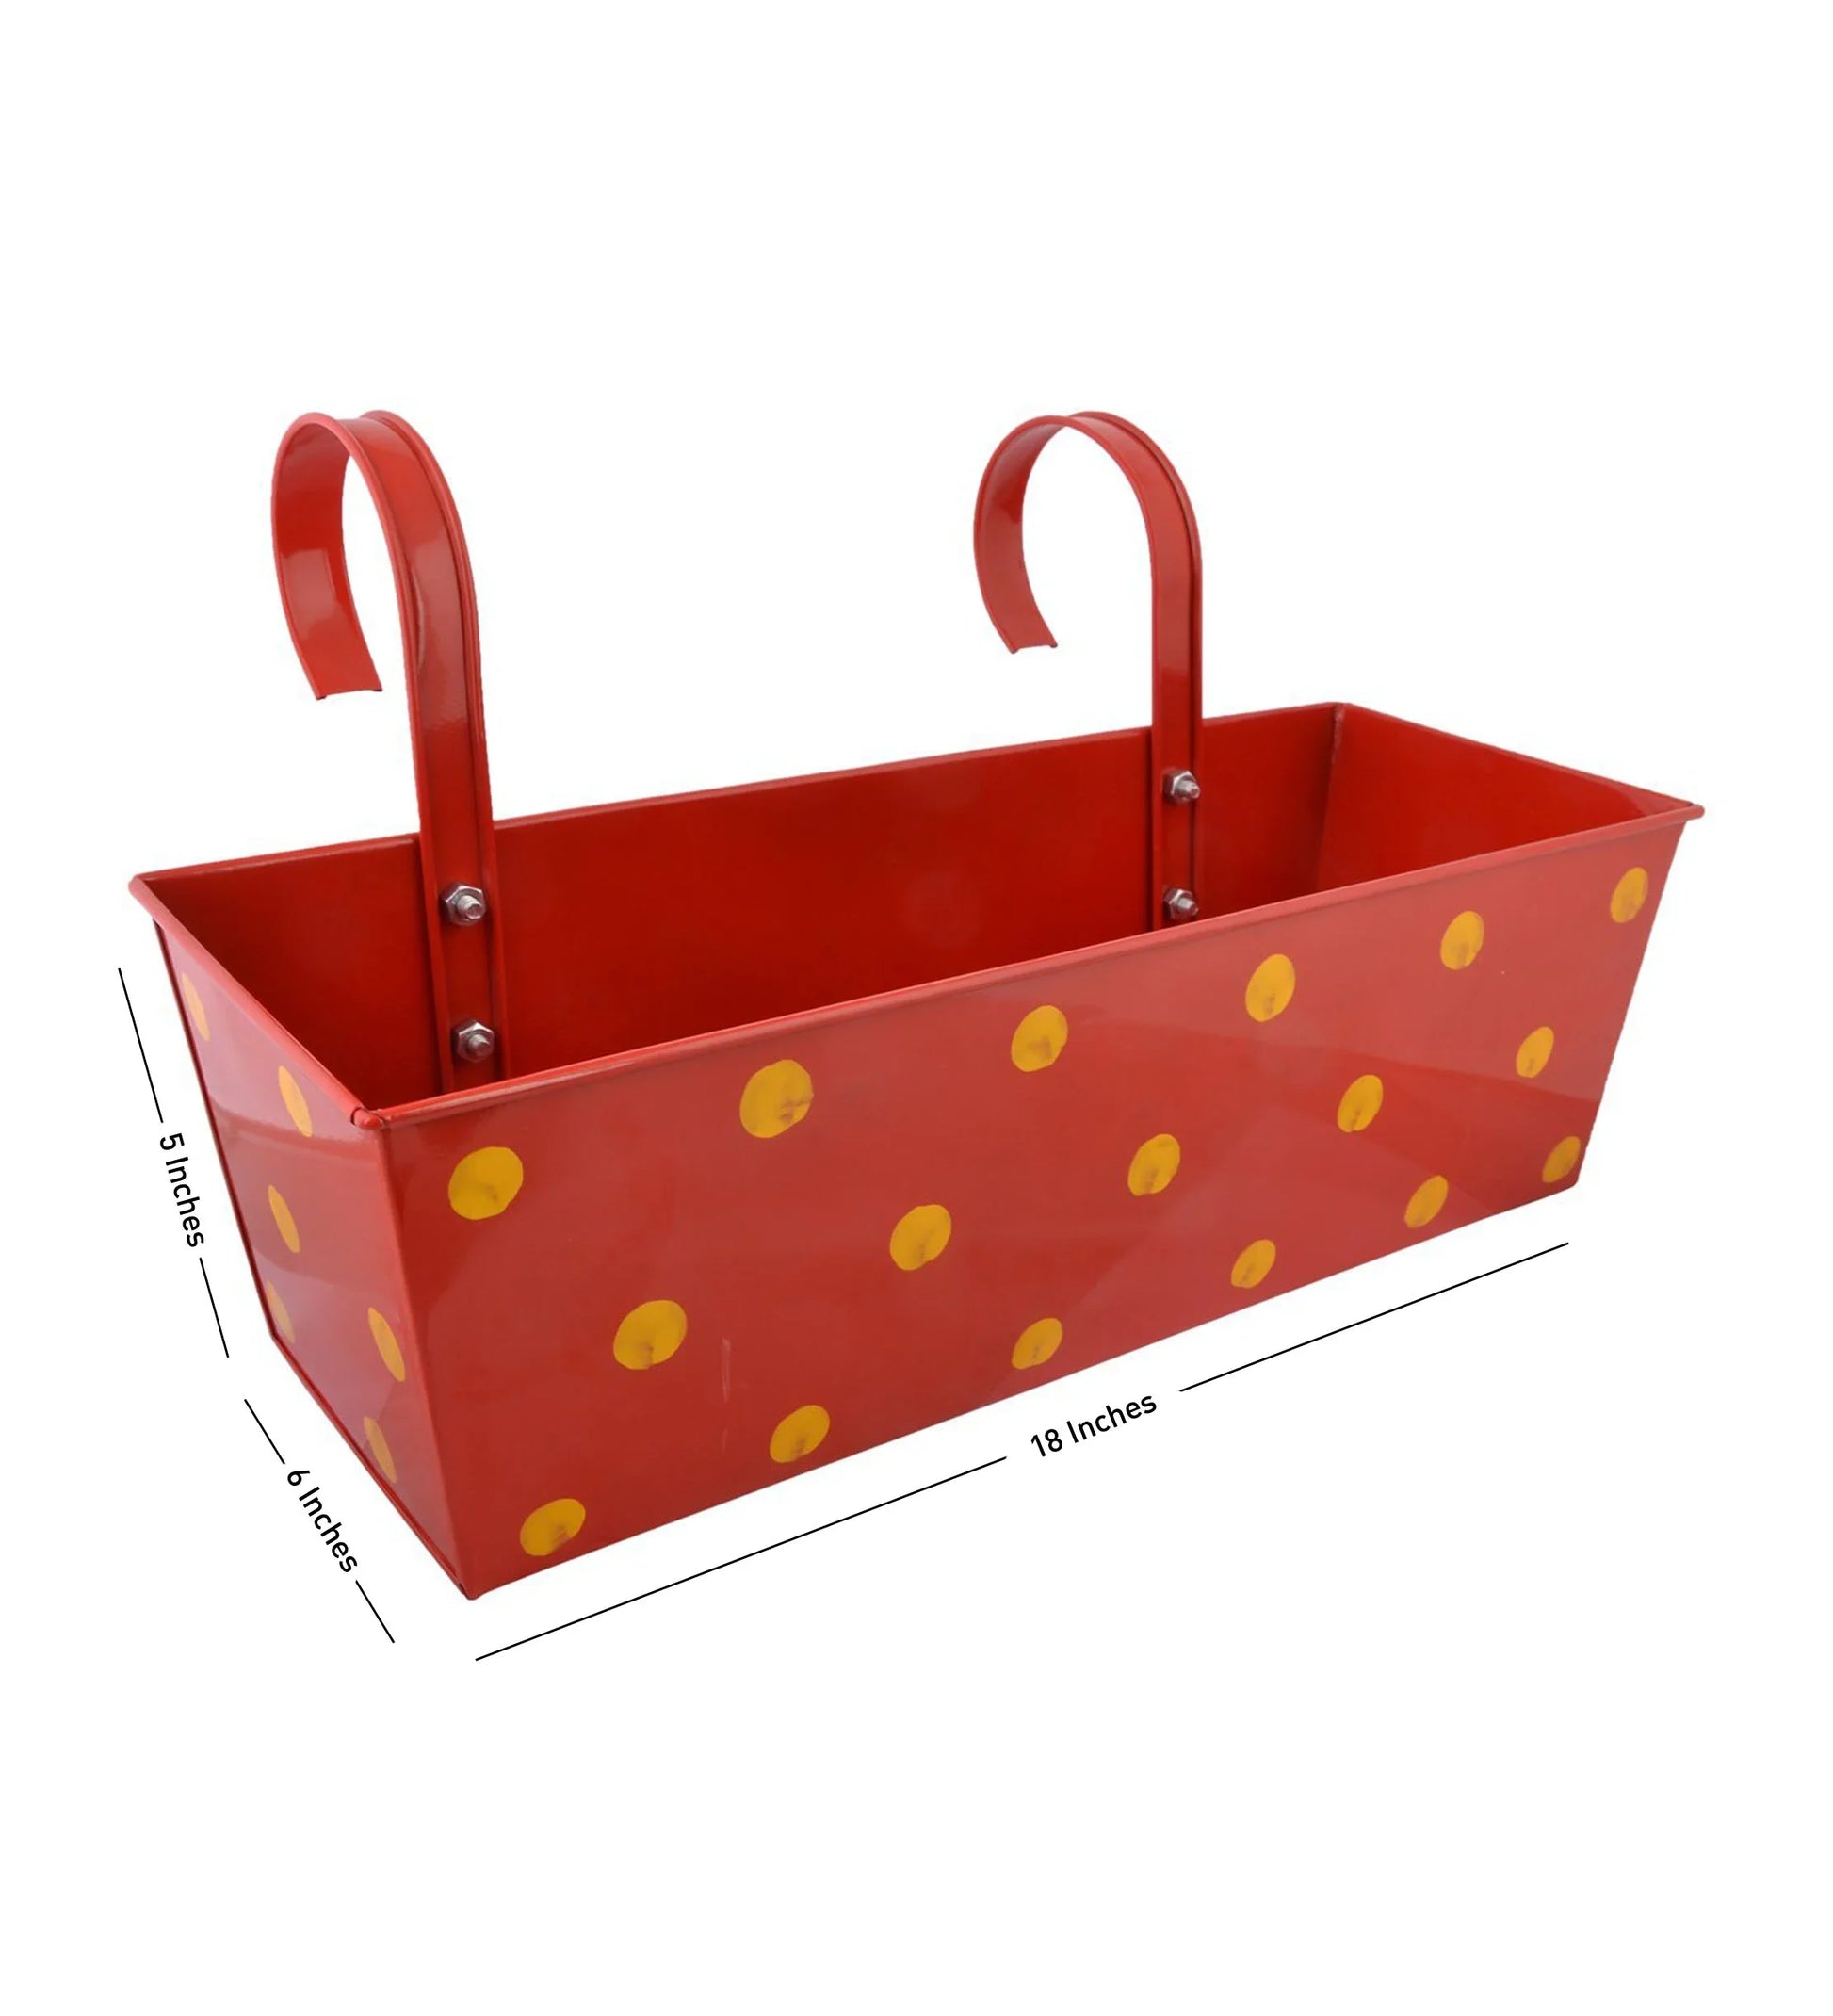 Polka Dot Rectangle Planter Red 18 Inches